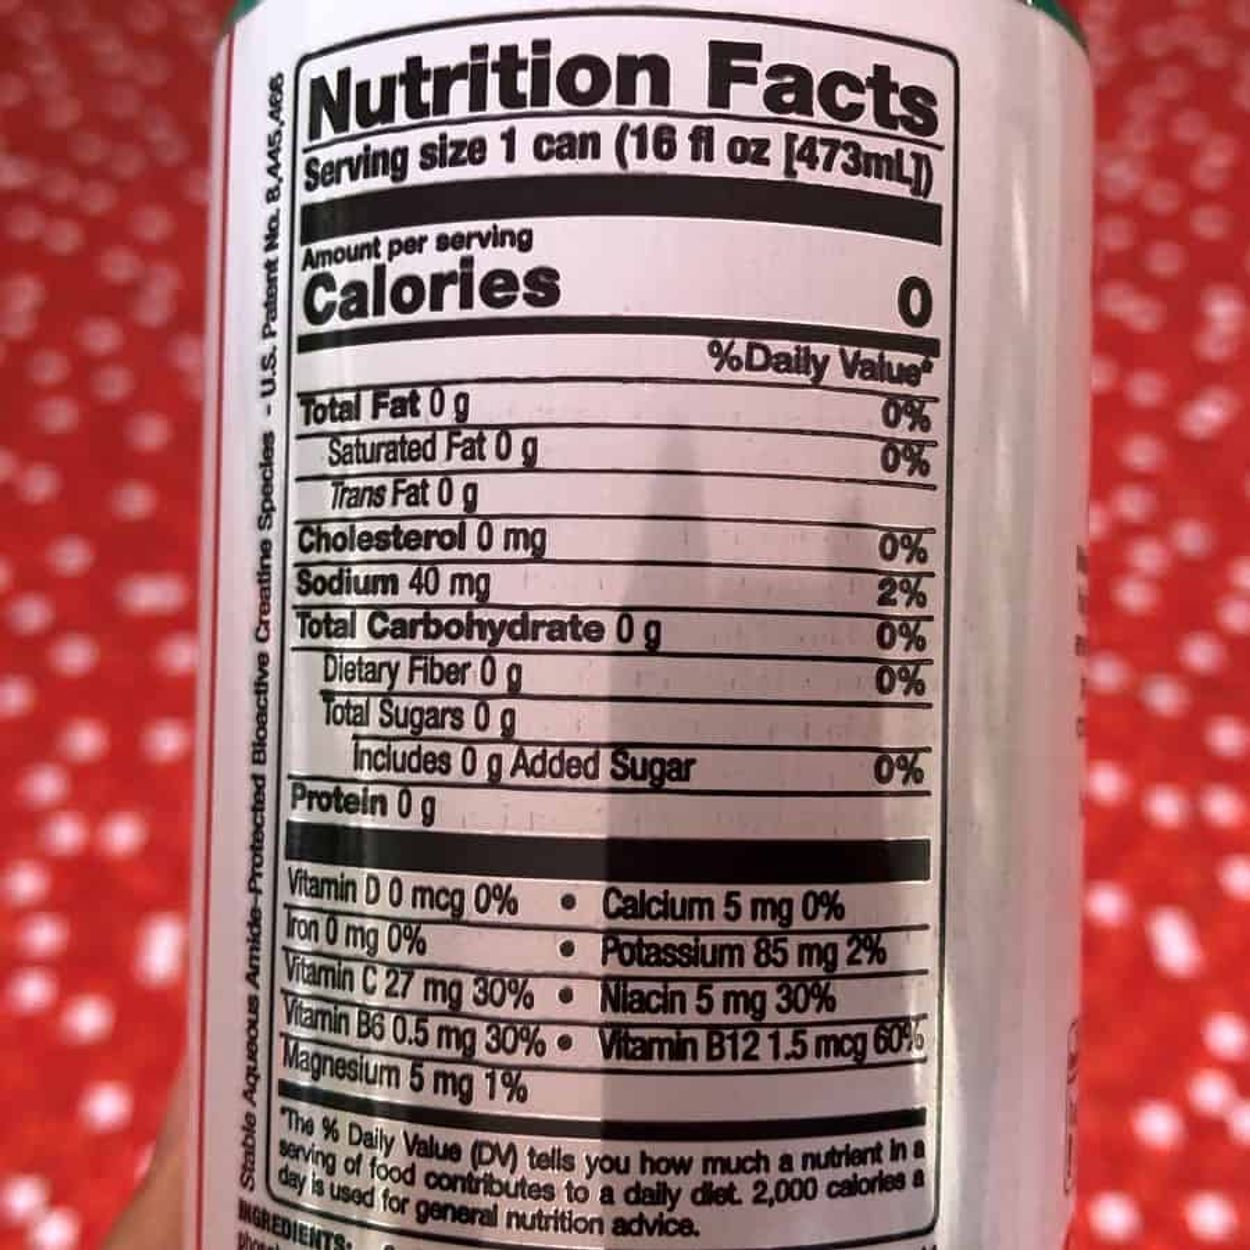 Bang Energy nutrition facts.